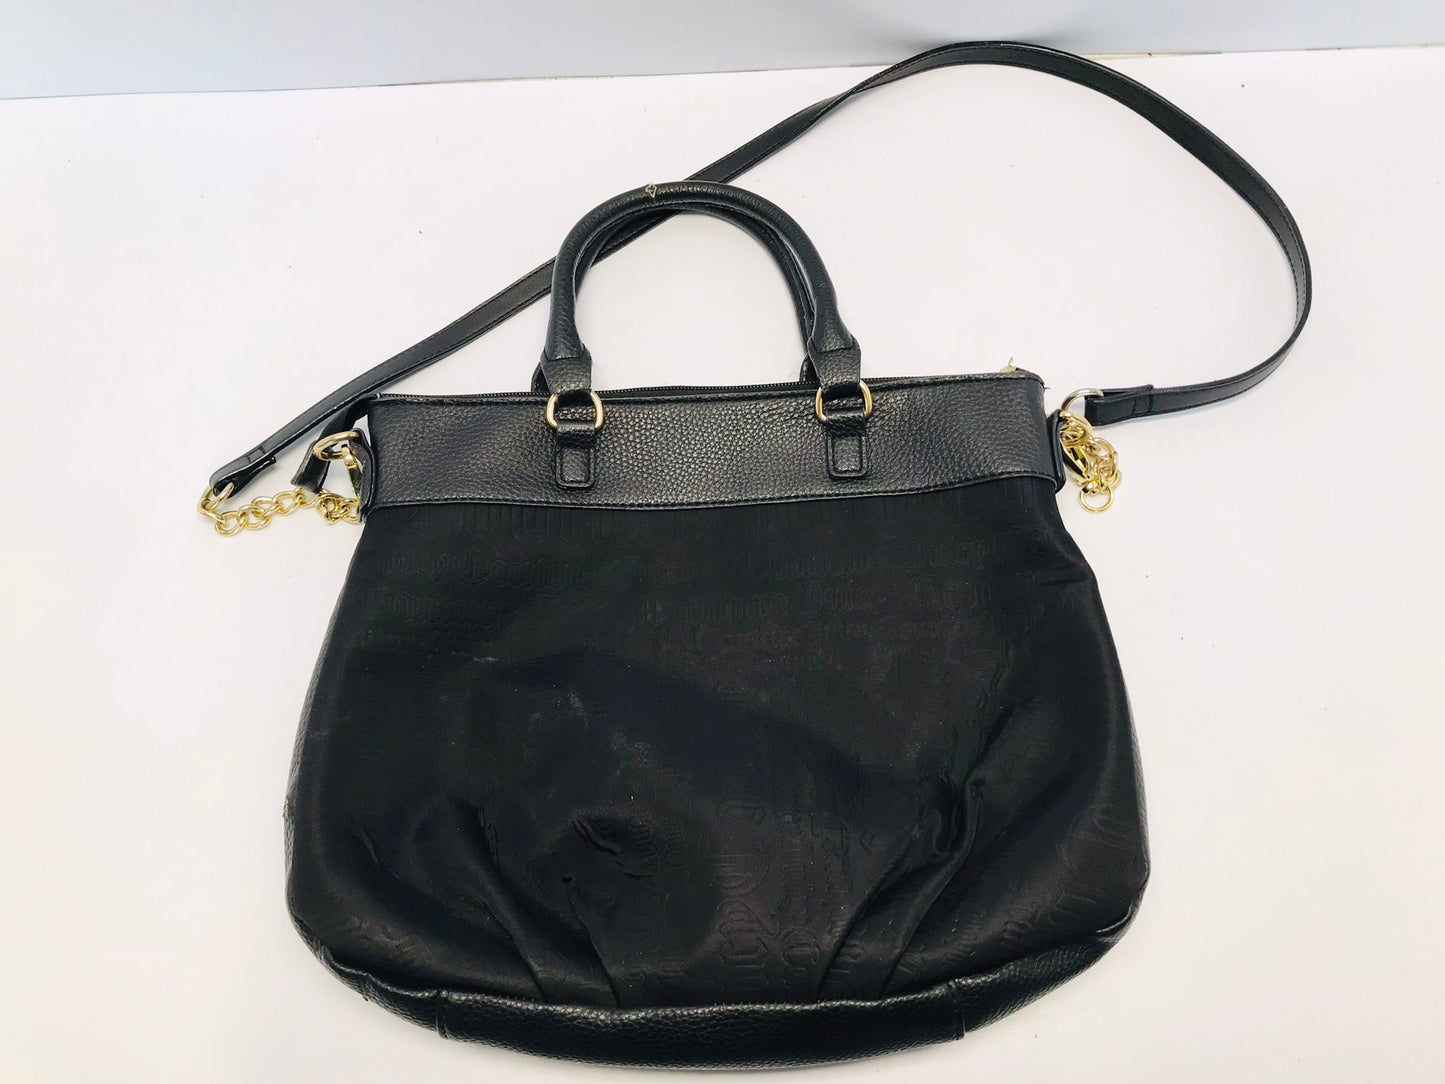 Purse Juicy Couture Black Gold Satchel With Strap Like New